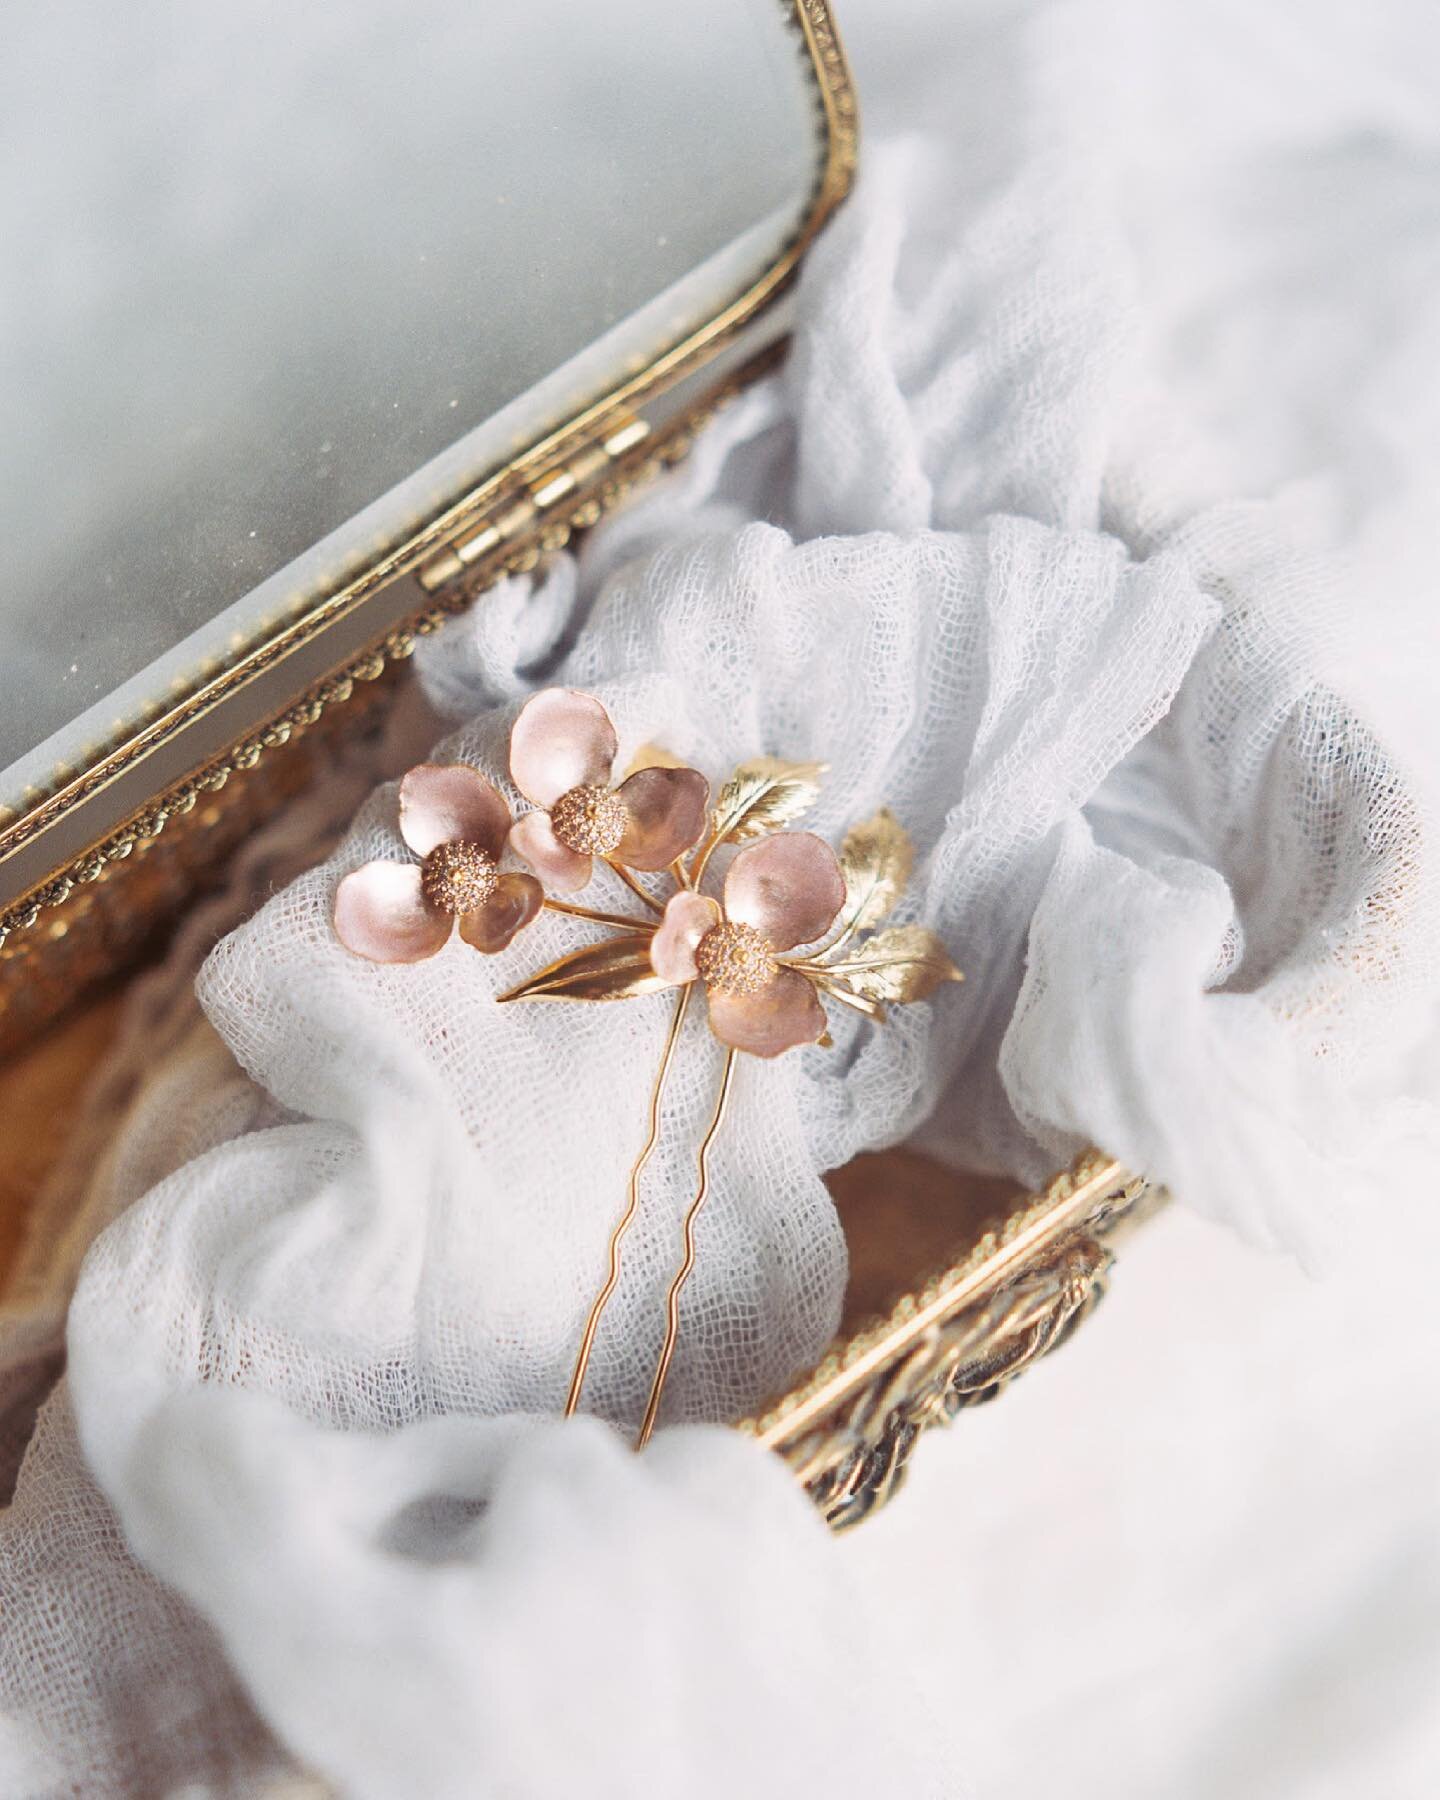 Dainty hair pin from the lovely @nea.milano. These pieces speak for themselves with how intricately designed they are! Do yourself a favor and go browse her page to see all her stunning work!